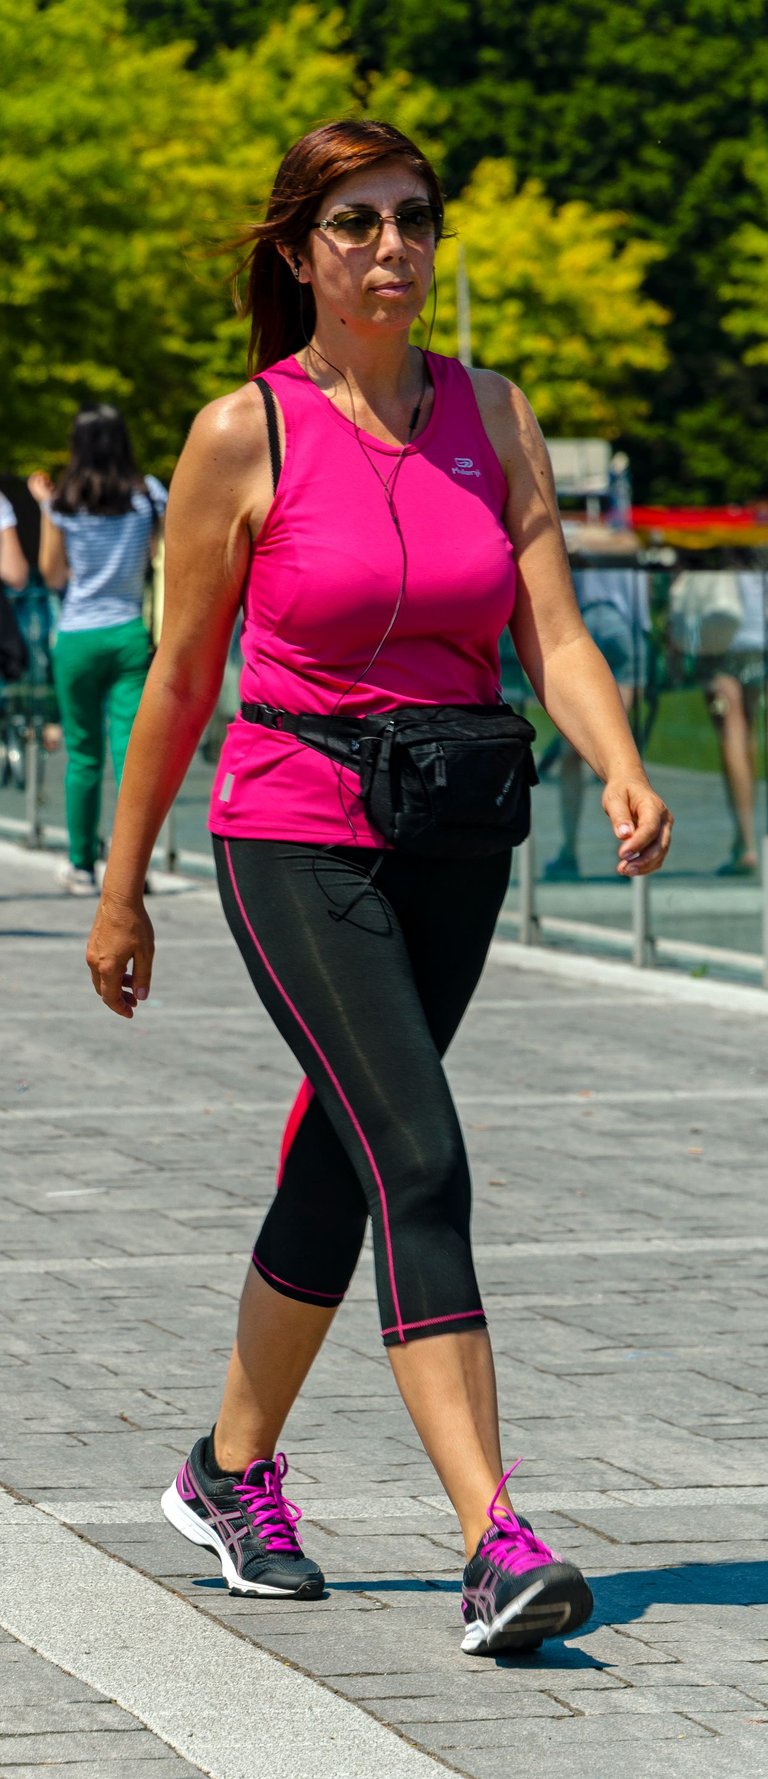 Woman_walking_in_exercise_clothing_on_Como_lakefront.jpg